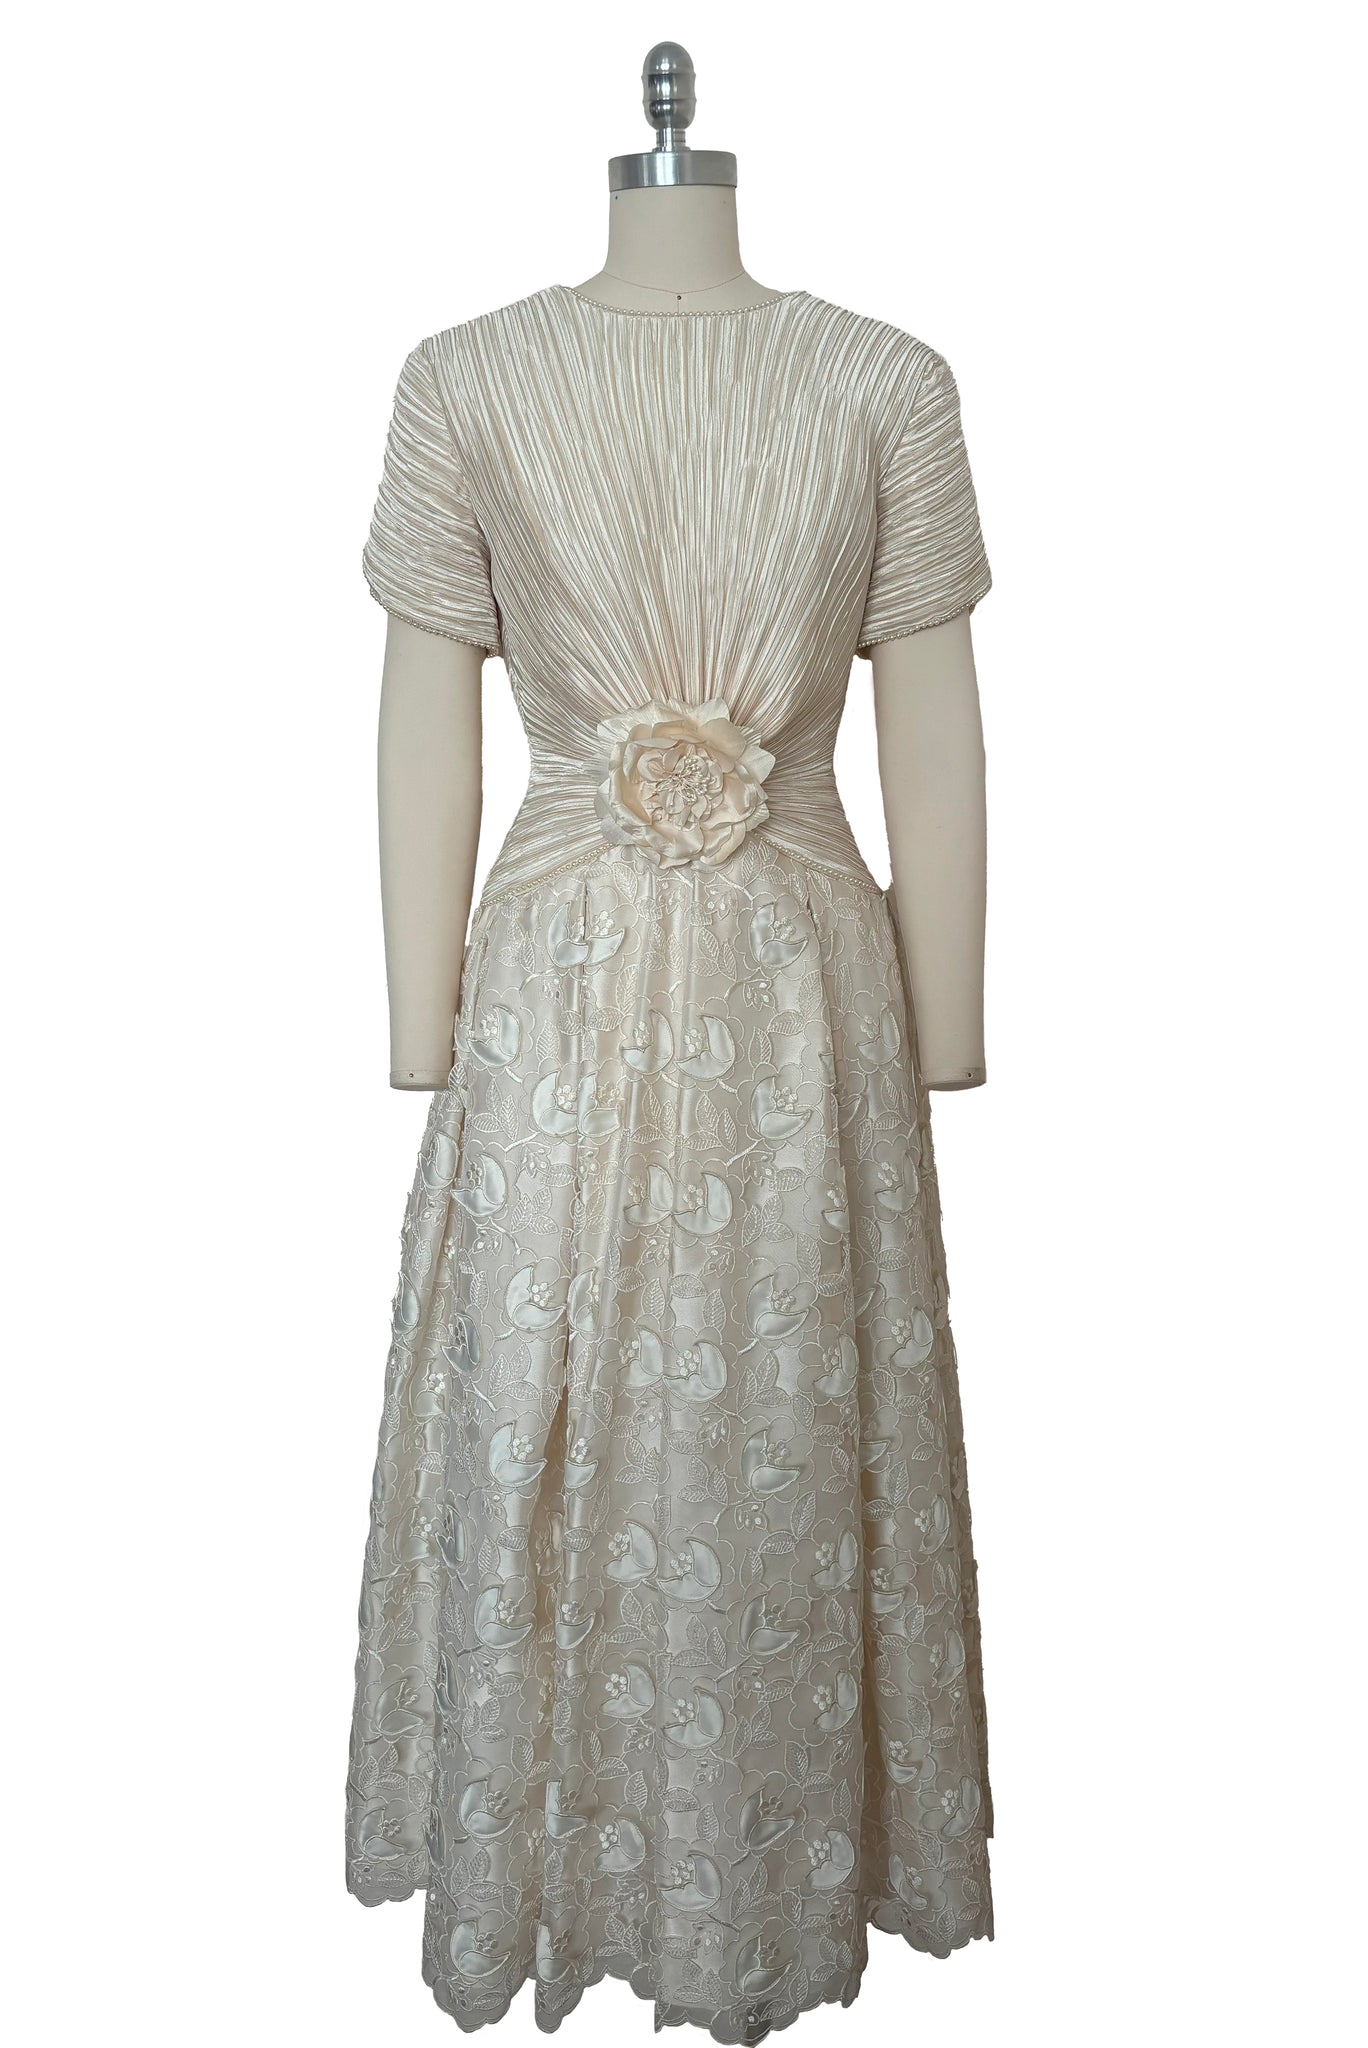 1980s Vintage Cream Satin Pleated Cutwork Floral Dress by George F Couture, Extra Small to Small